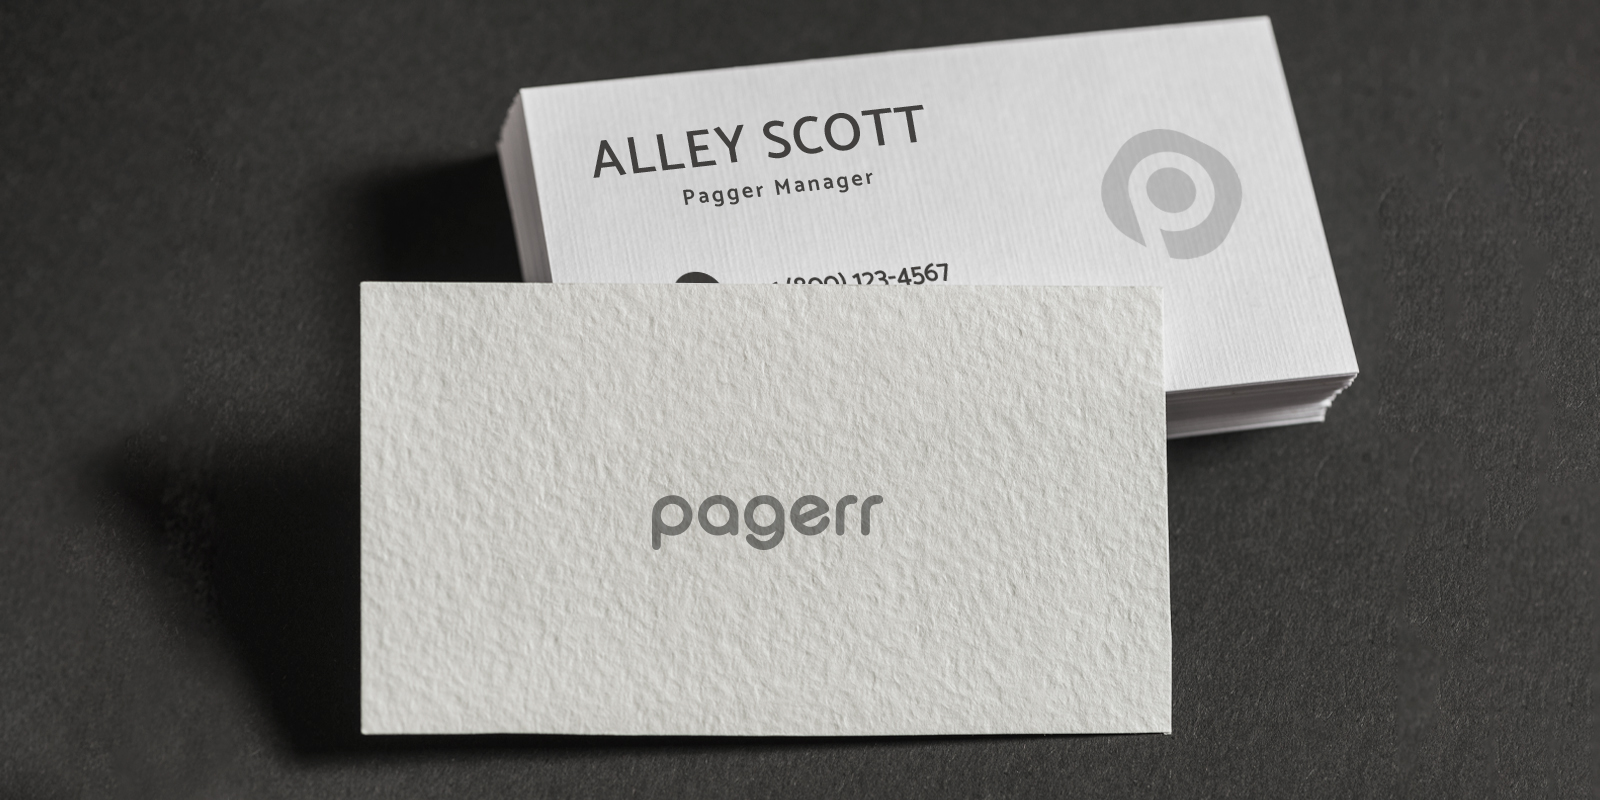 Special material business cards in Geelong - Print with Pagerr